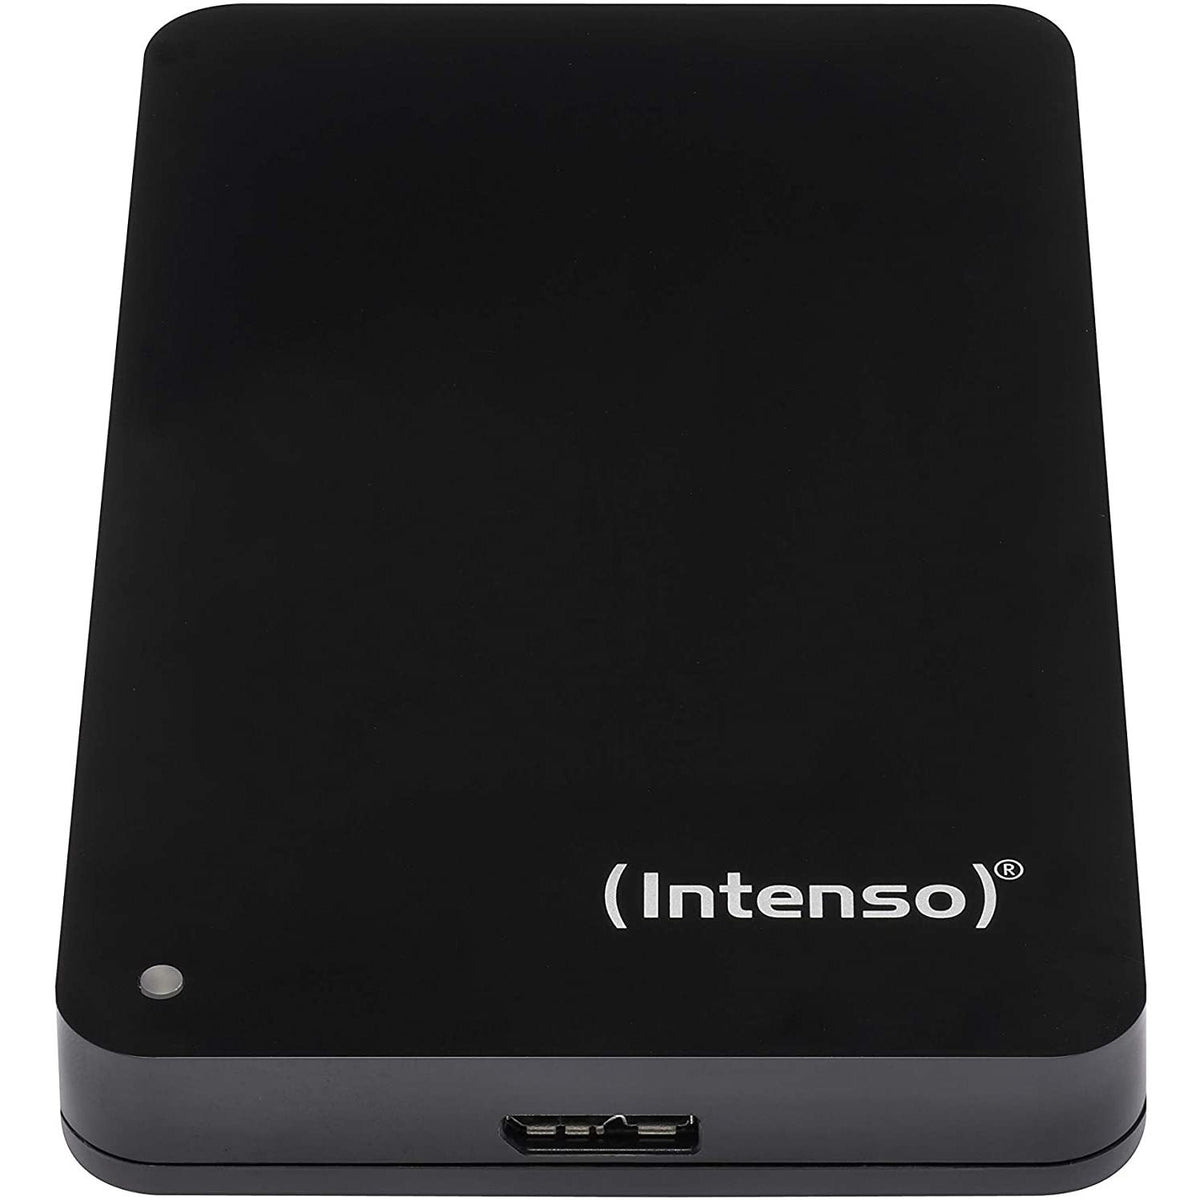 Intenso 2.5&quot; 4TB USB 3.0 External Hard Drive - Black | 6021512 from Intenso - DID Electrical